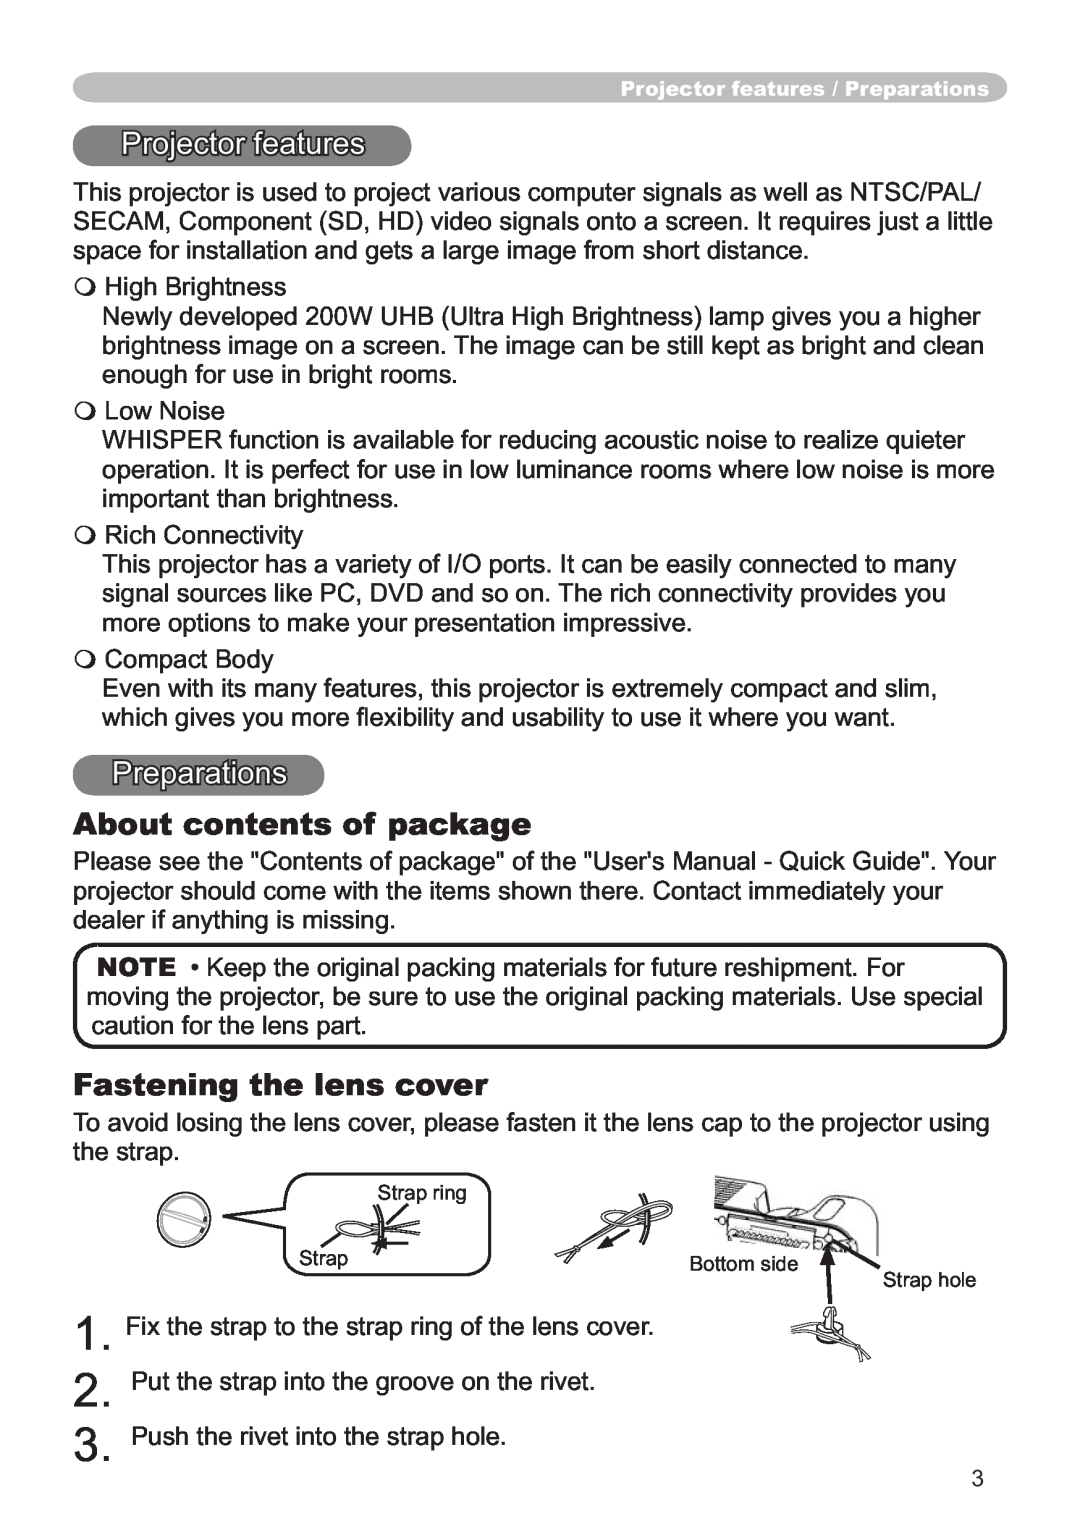 Hitachi ED-X12 user manual 1 2 3, Projector features, Preparations, About contents of package, Fastening the lens cover 